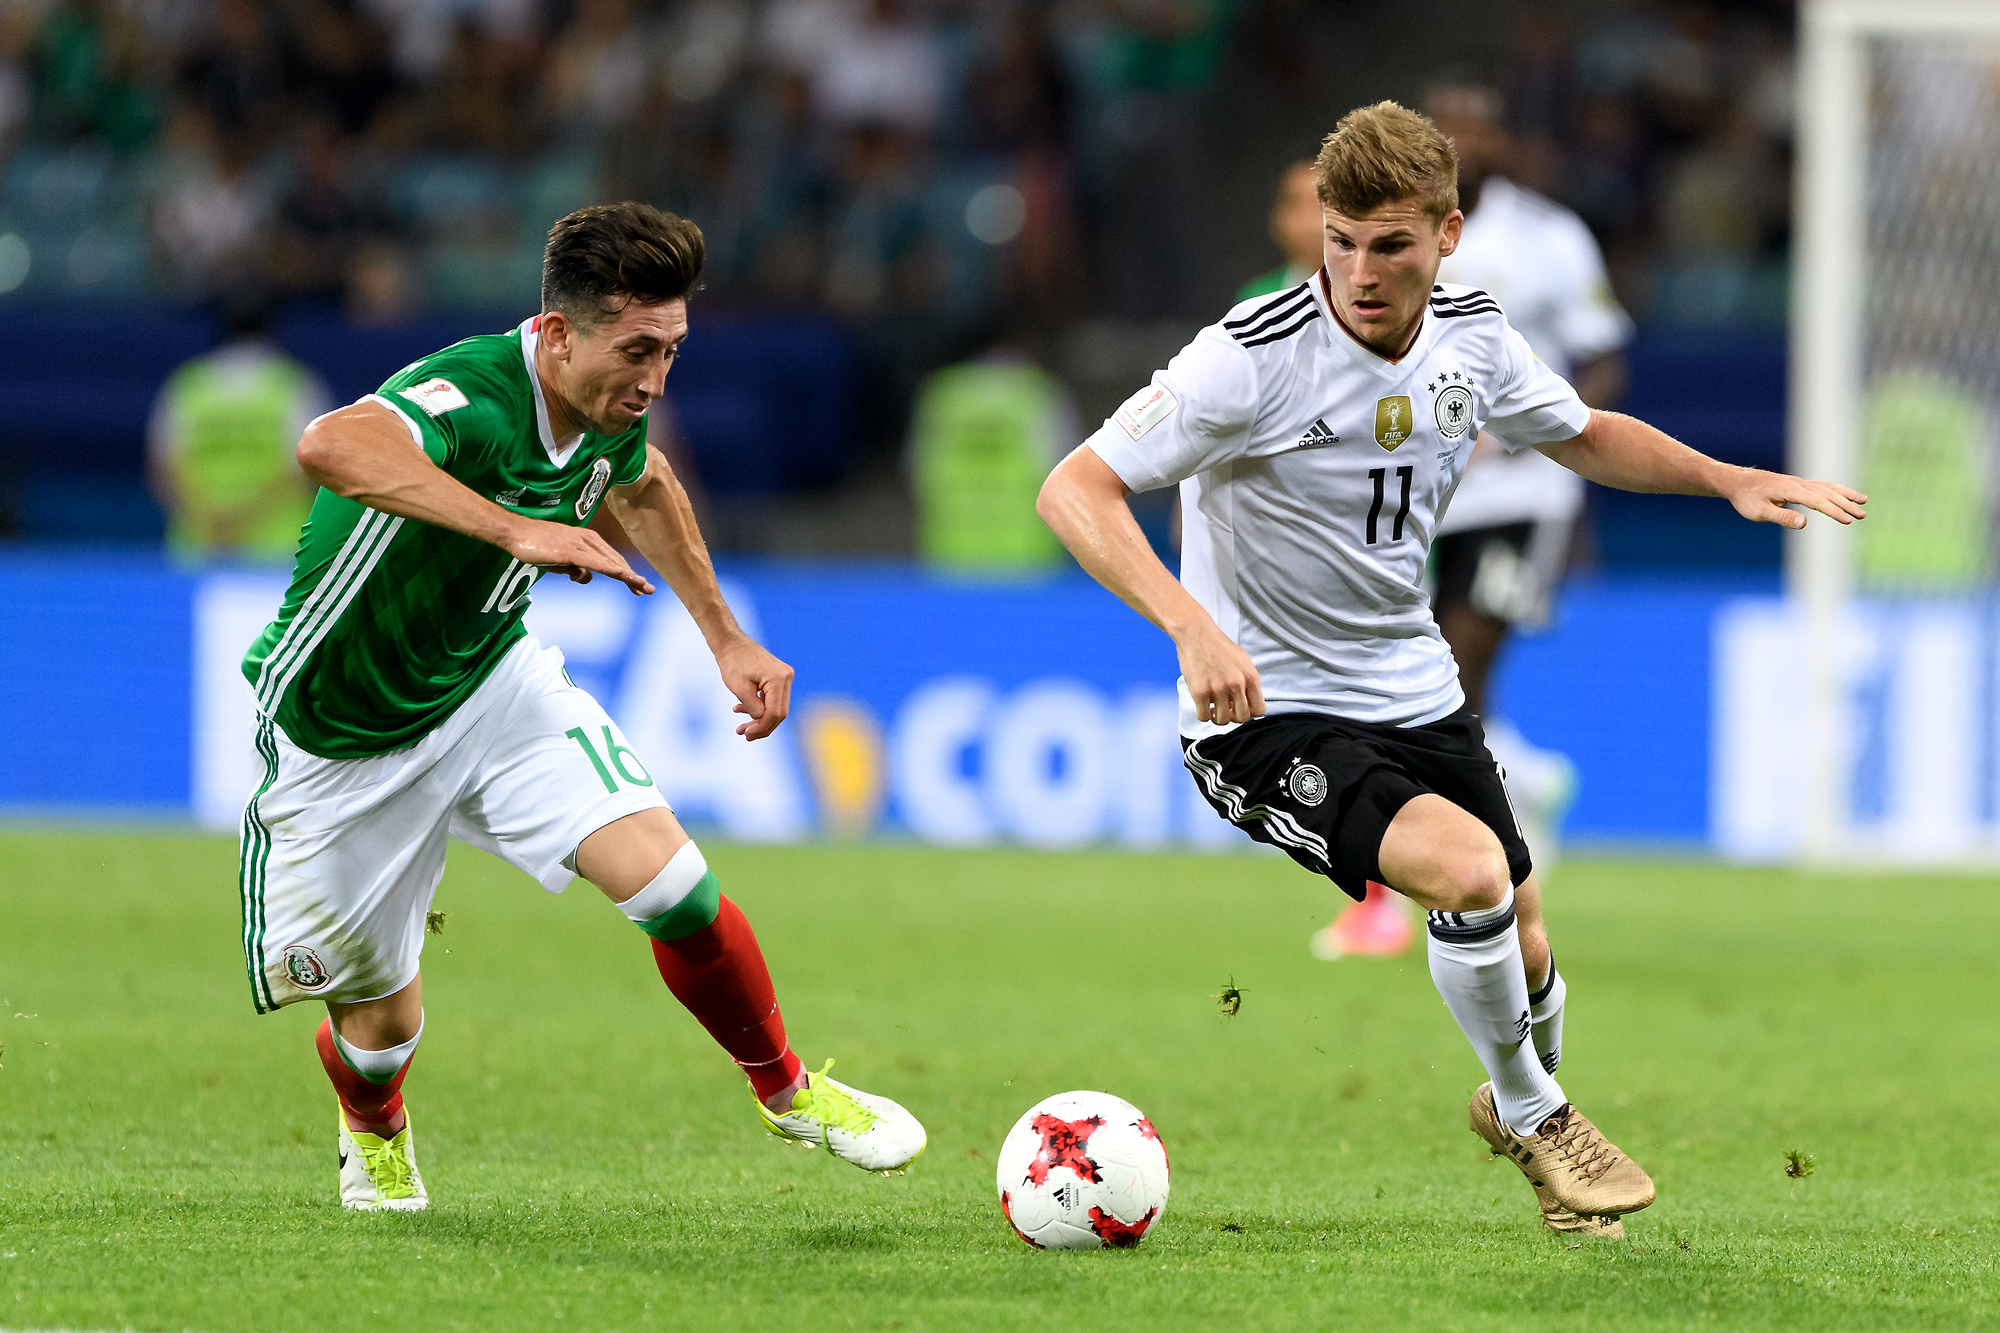 Germany vs Mexico at the 2018 FIFA World Cup